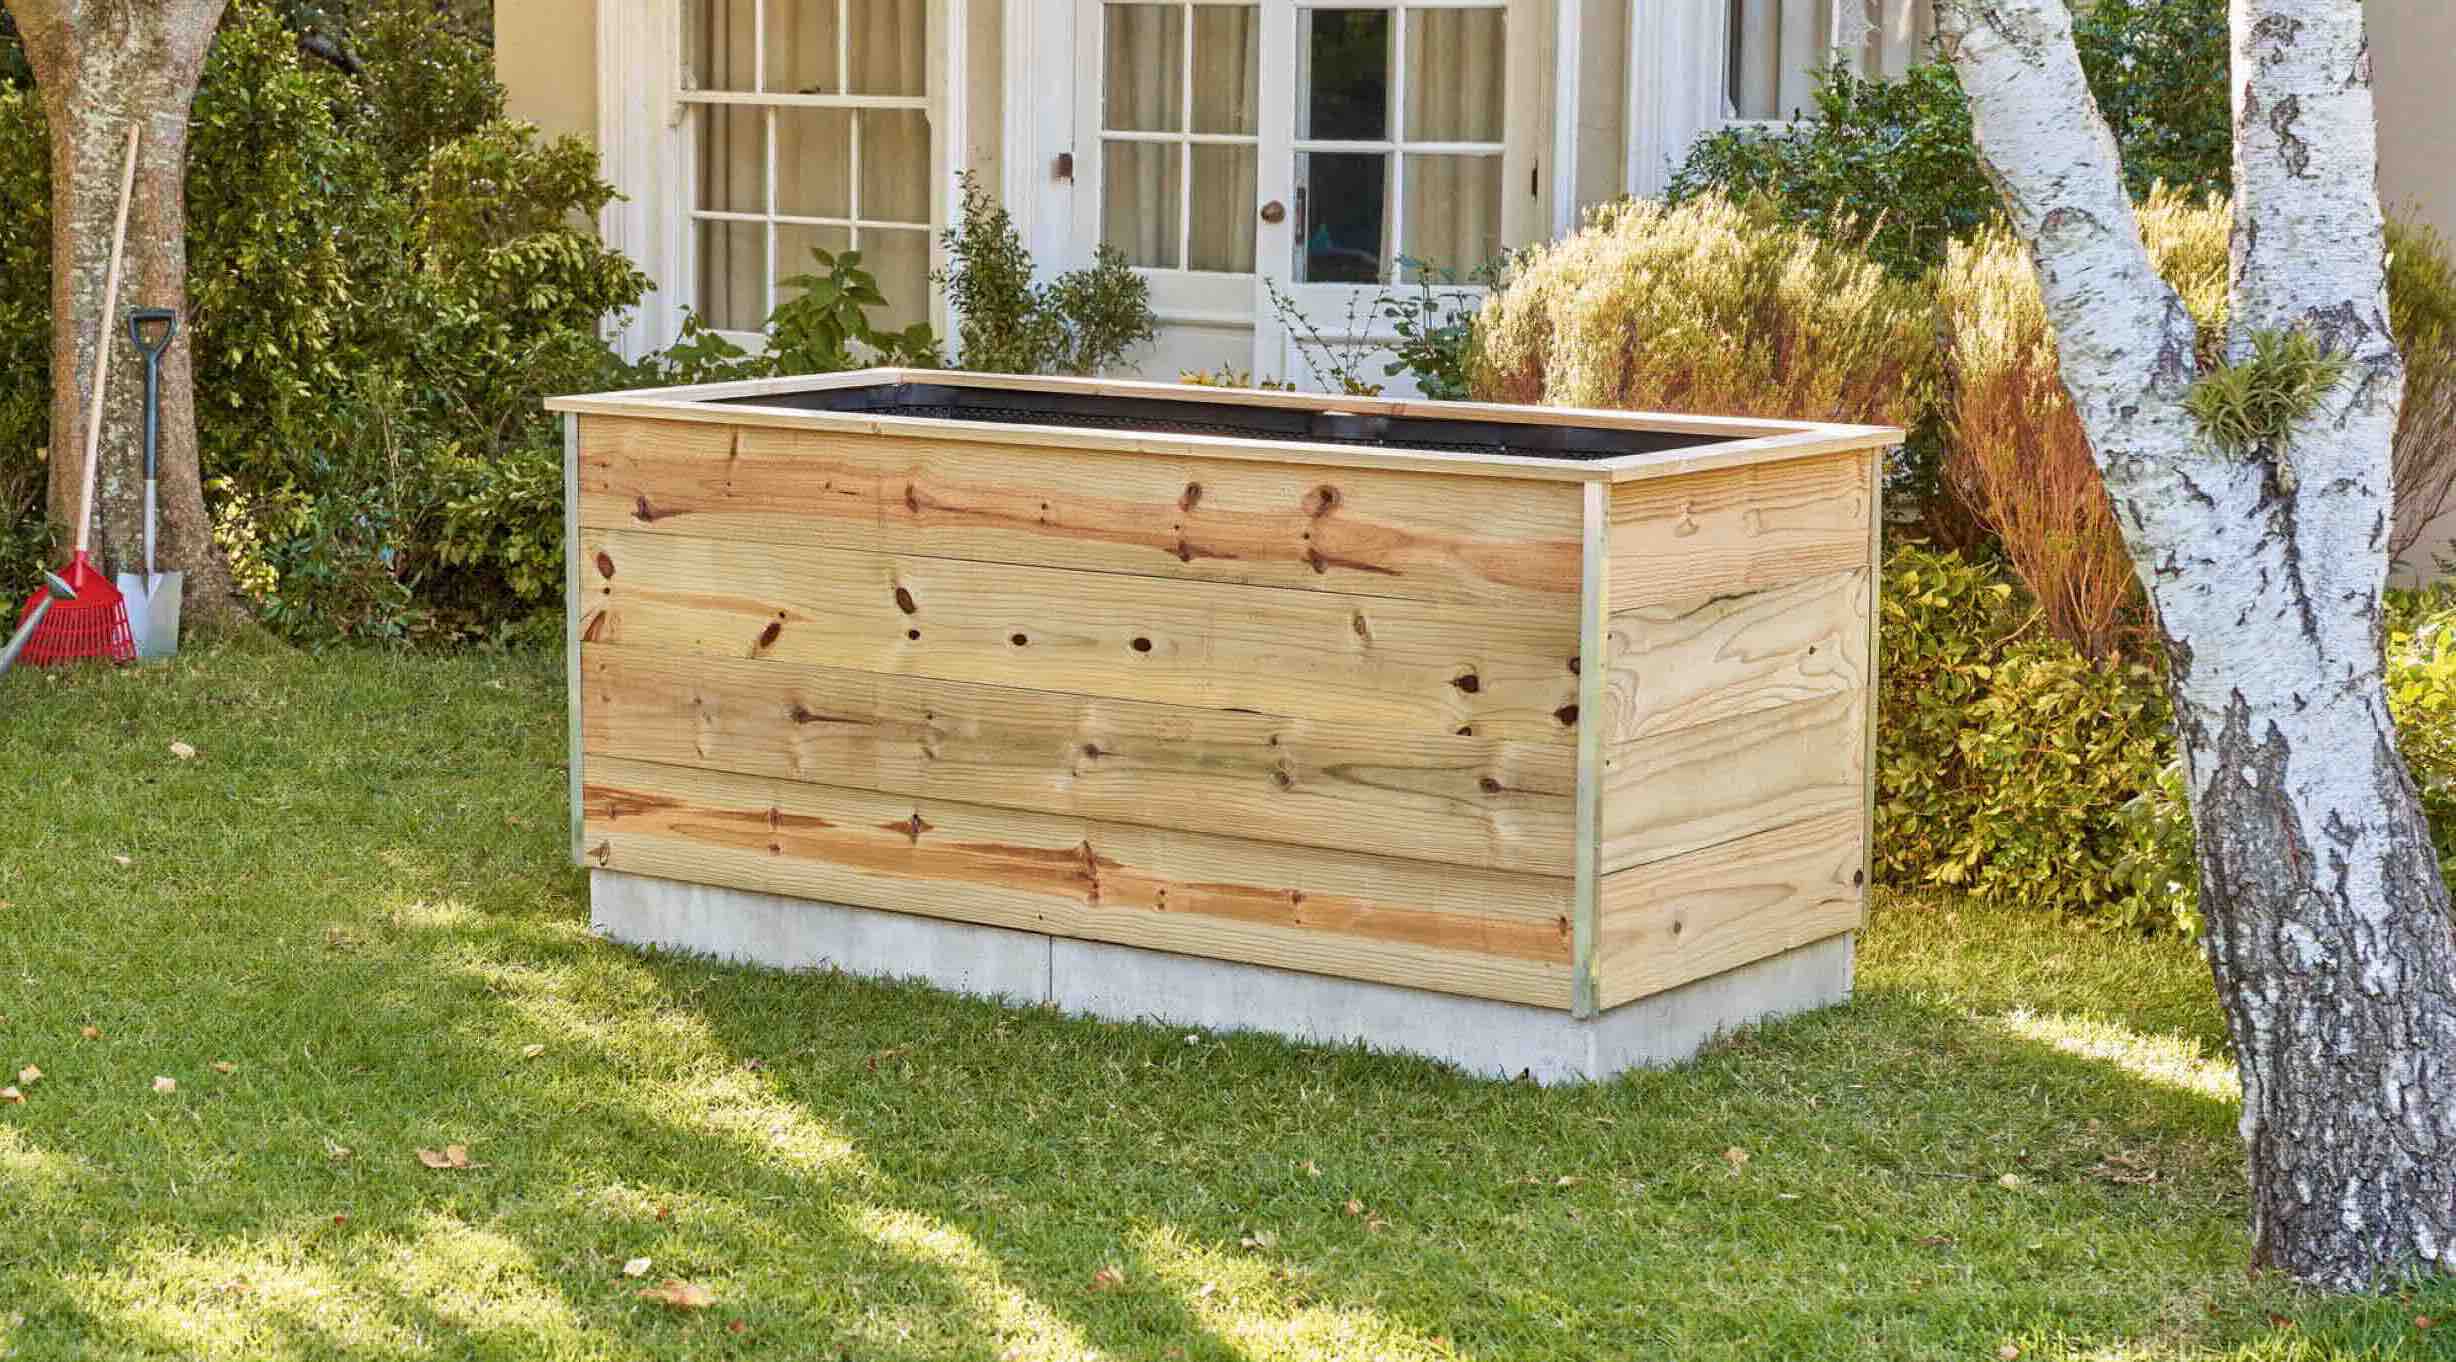 How To Build A Wood Raised Garden Bed